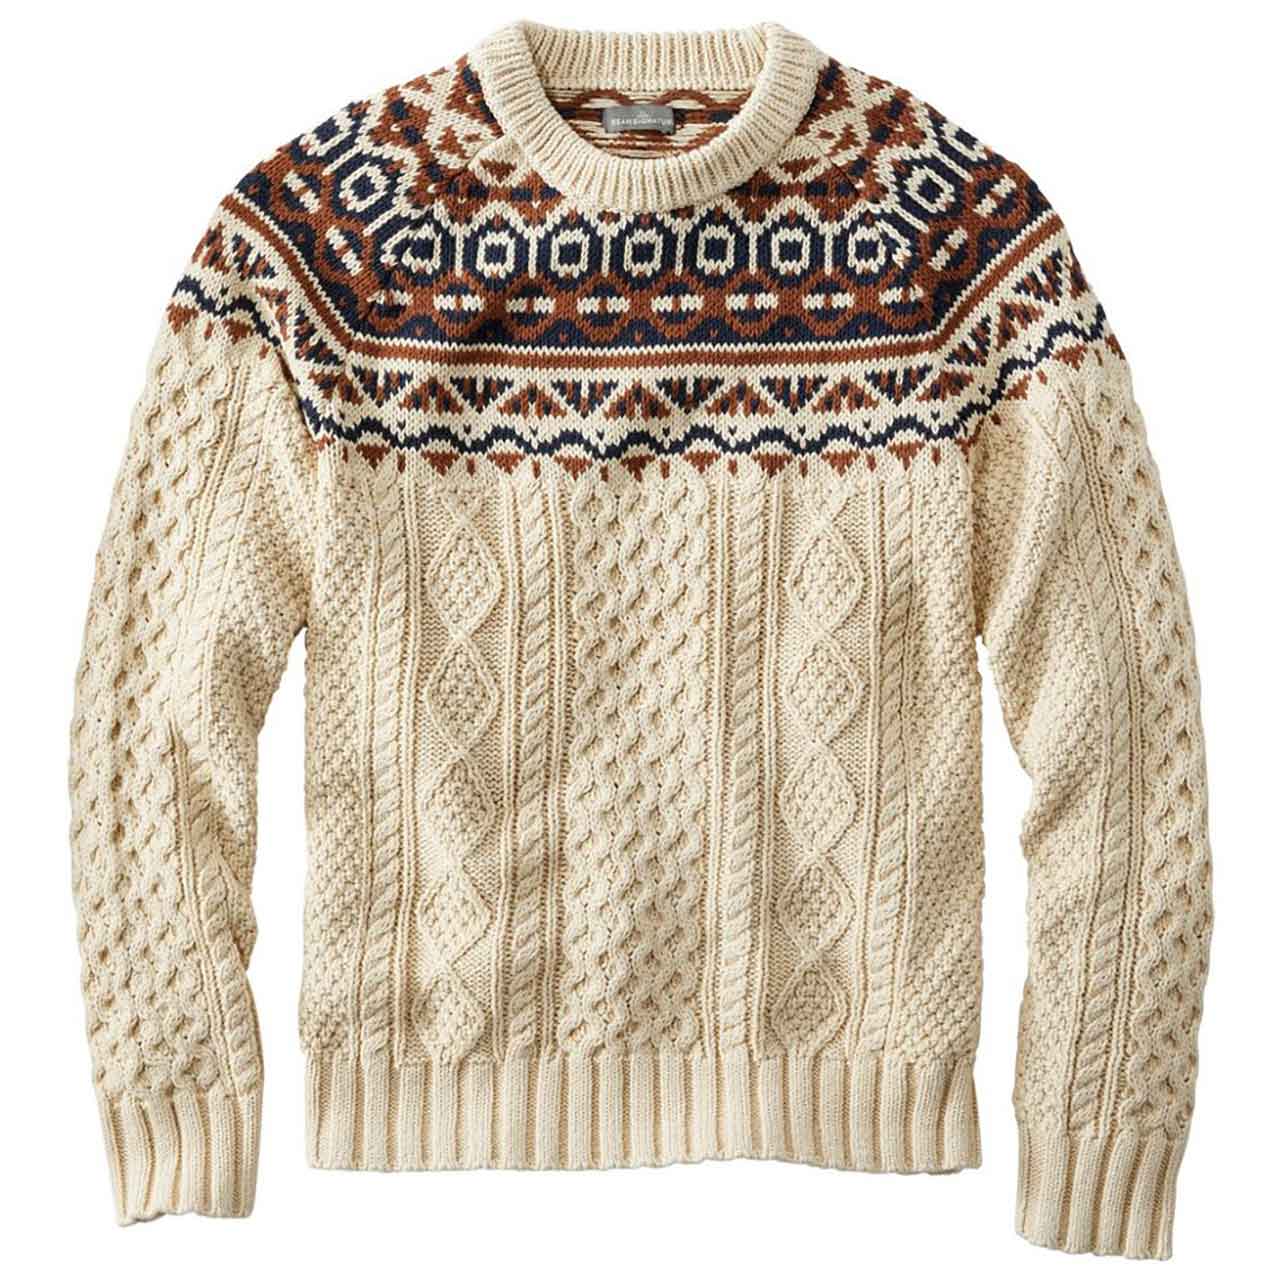 Best sweaters 2022, selecting the perfect sweater involves a careful consideration of multiple factors to ensure both style and functionality.